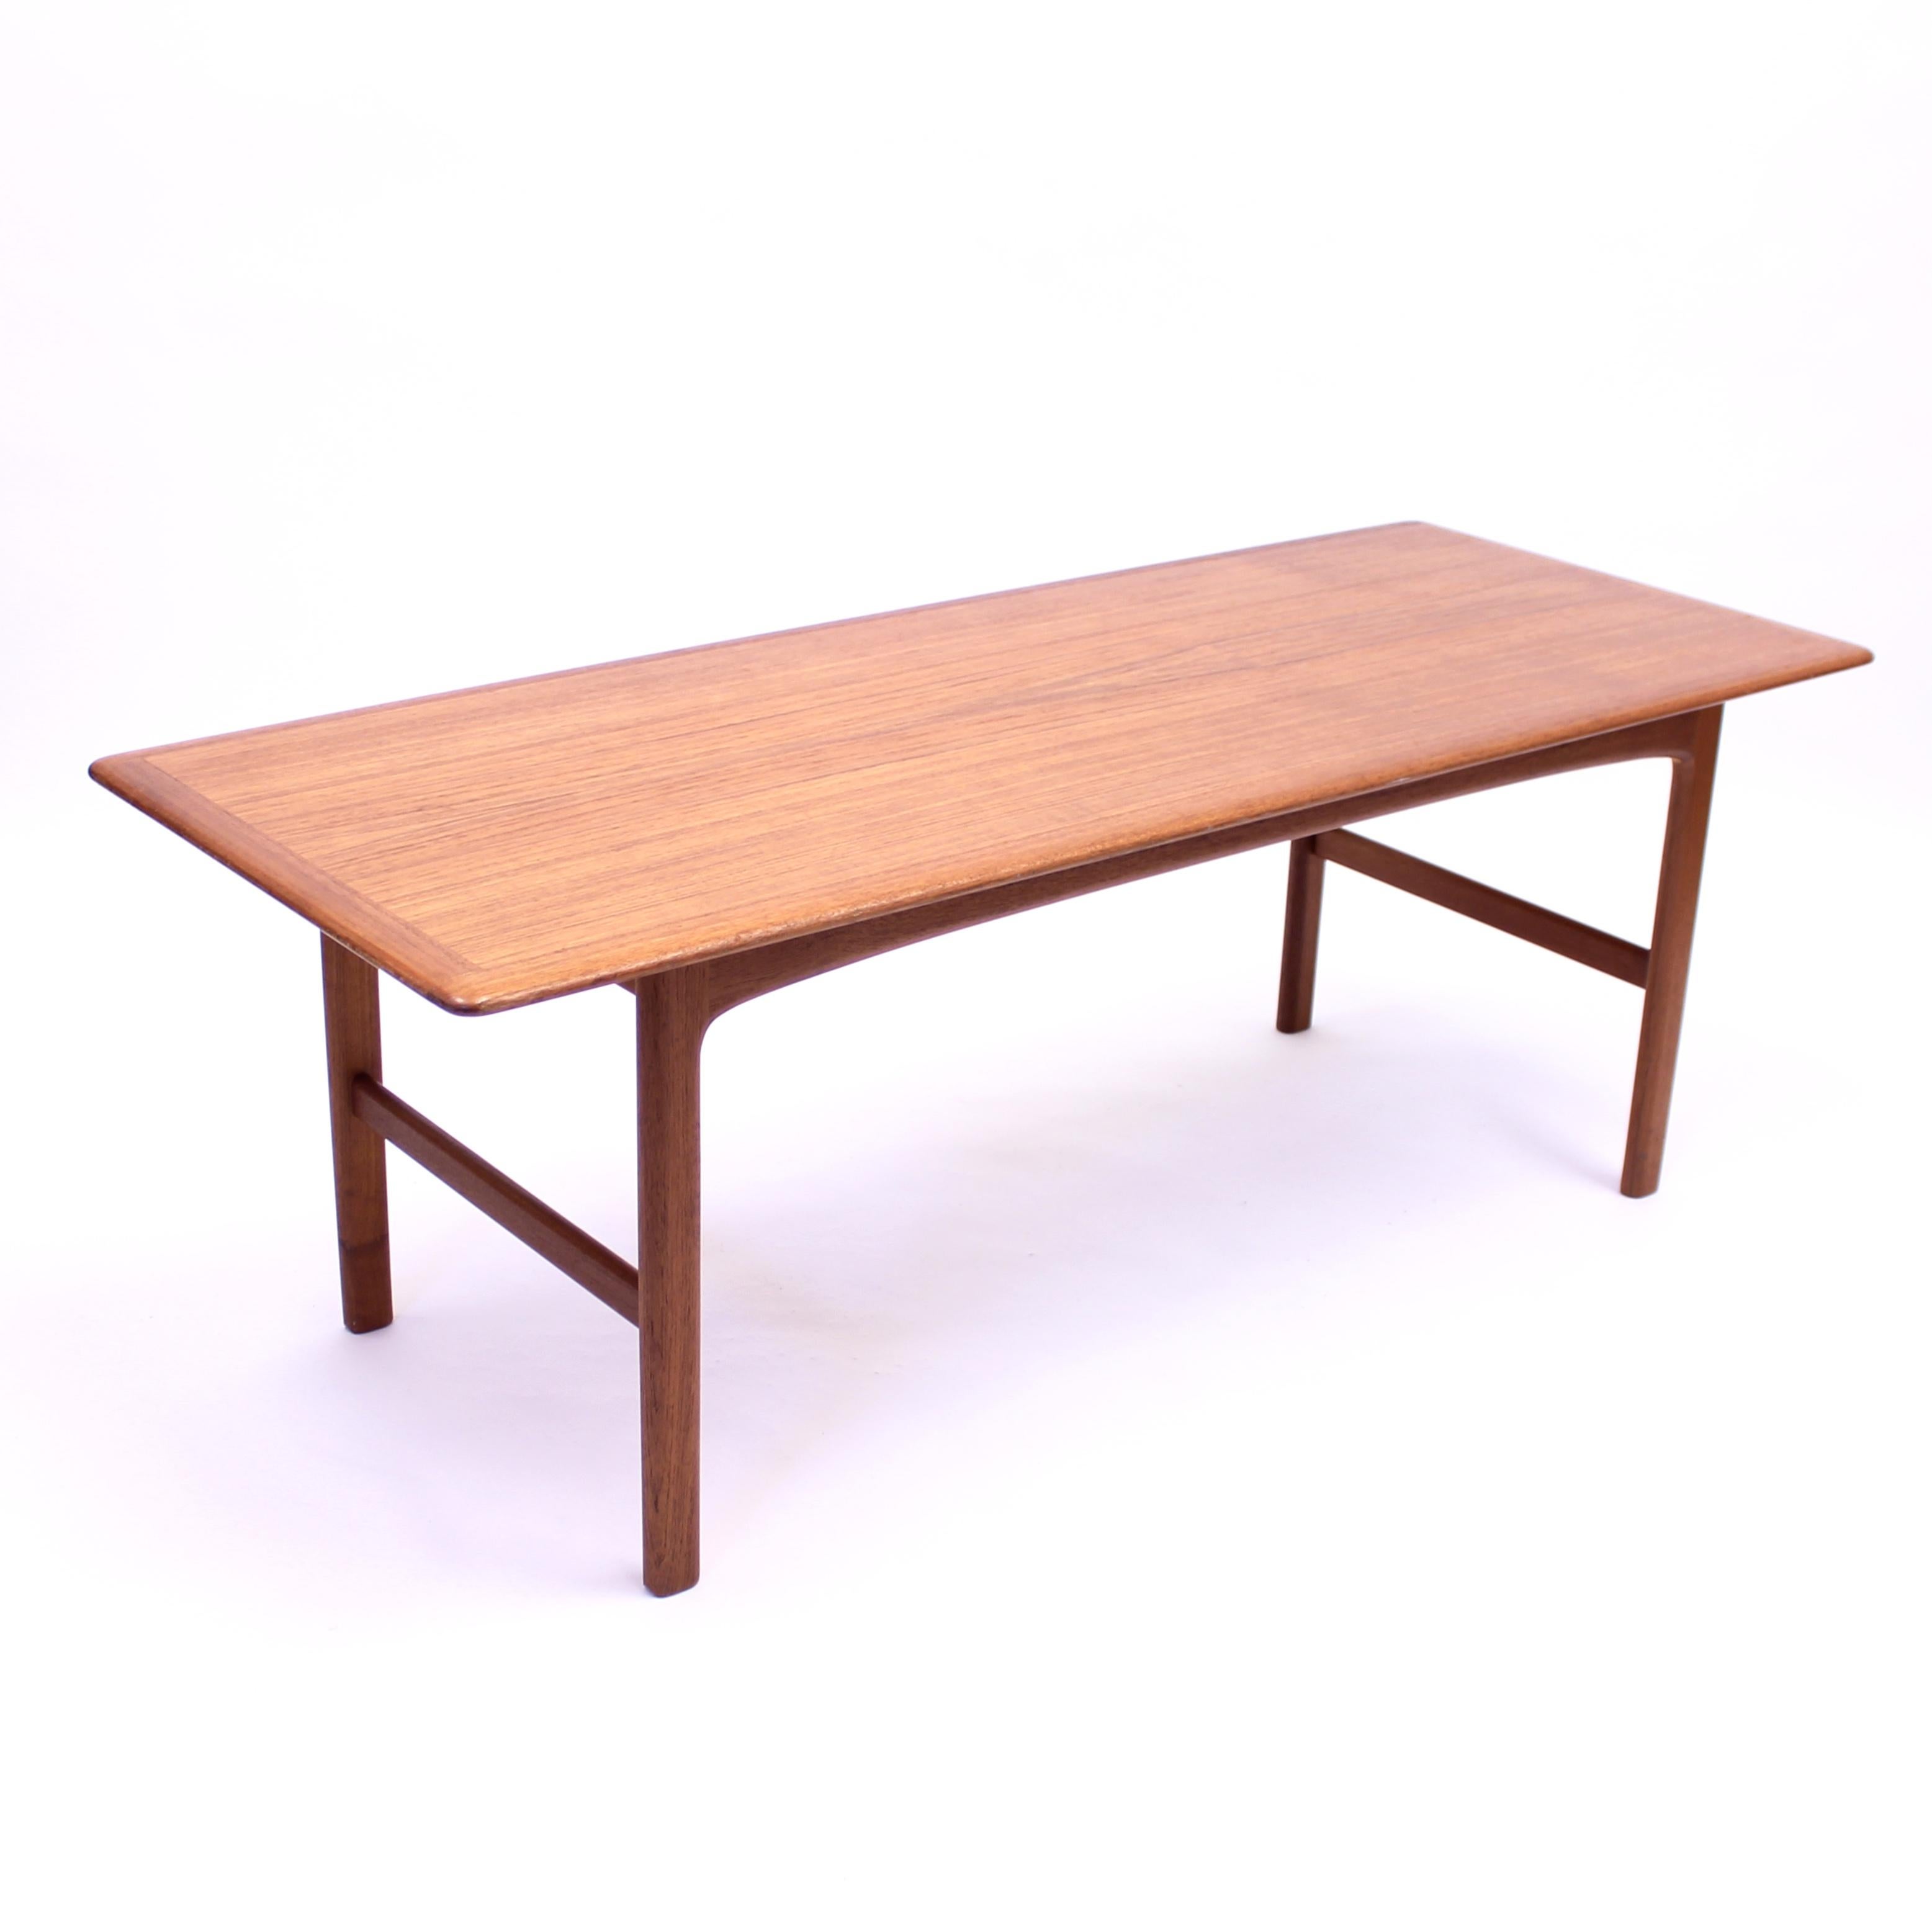 Teak coffee table, model Rapsodi, by renowned Swedish designer Folke Ohlsson for Tingströms and the Bra Bohag series. Very good untouched vintage condition with light ware consistent with age and use.